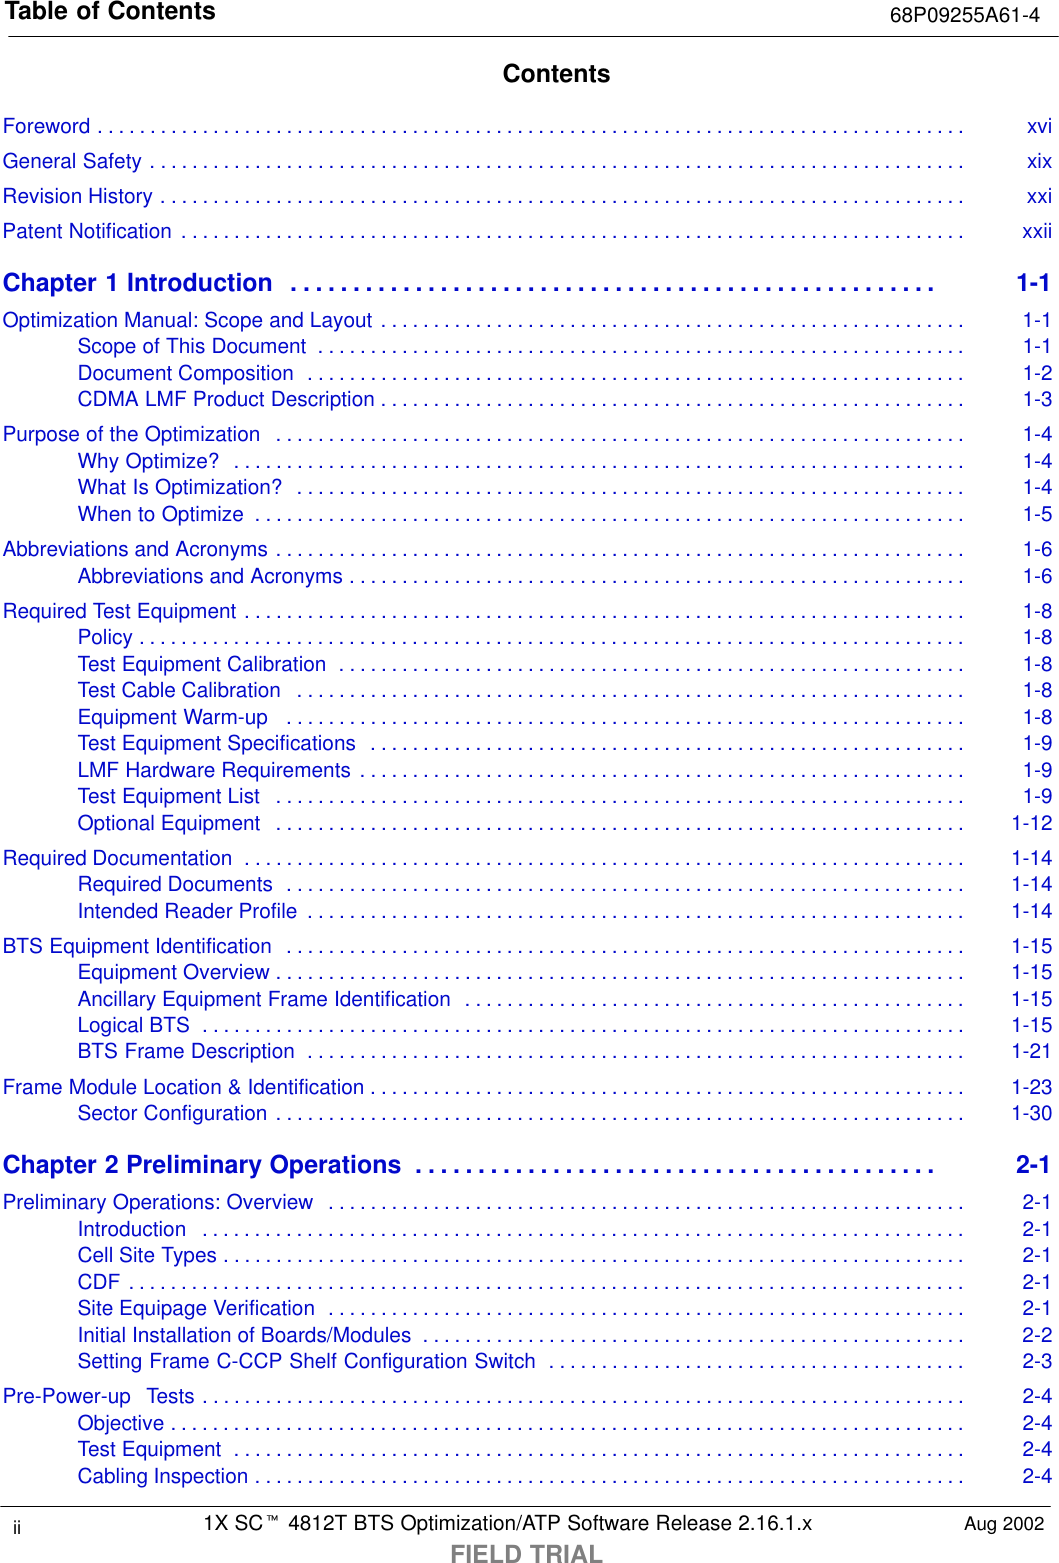 Table of Contents 68P09255A61-41X SCt 4812T BTS Optimization/ATP Software Release 2.16.1.xFIELD TRIALii Aug 2002ContentsForeword xvi. . . . . . . . . . . . . . . . . . . . . . . . . . . . . . . . . . . . . . . . . . . . . . . . . . . . . . . . . . . . . . . . . . . . . . . . . . . . . . . . . . . General Safety xix. . . . . . . . . . . . . . . . . . . . . . . . . . . . . . . . . . . . . . . . . . . . . . . . . . . . . . . . . . . . . . . . . . . . . . . . . . . . . . Revision History xxi. . . . . . . . . . . . . . . . . . . . . . . . . . . . . . . . . . . . . . . . . . . . . . . . . . . . . . . . . . . . . . . . . . . . . . . . . . . . . Patent Notification xxii. . . . . . . . . . . . . . . . . . . . . . . . . . . . . . . . . . . . . . . . . . . . . . . . . . . . . . . . . . . . . . . . . . . . . . . . . . . Chapter 1 Introduction 1-1. . . . . . . . . . . . . . . . . . . . . . . . . . . . . . . . . . . . . . . . . . . . . . . . . . . . Optimization Manual: Scope and Layout 1-1. . . . . . . . . . . . . . . . . . . . . . . . . . . . . . . . . . . . . . . . . . . . . . . . . . . . . . . . Scope of This Document 1-1. . . . . . . . . . . . . . . . . . . . . . . . . . . . . . . . . . . . . . . . . . . . . . . . . . . . . . . . . . . . . . Document Composition 1-2. . . . . . . . . . . . . . . . . . . . . . . . . . . . . . . . . . . . . . . . . . . . . . . . . . . . . . . . . . . . . . . CDMA LMF Product Description 1-3. . . . . . . . . . . . . . . . . . . . . . . . . . . . . . . . . . . . . . . . . . . . . . . . . . . . . . . . Purpose of the Optimization 1-4. . . . . . . . . . . . . . . . . . . . . . . . . . . . . . . . . . . . . . . . . . . . . . . . . . . . . . . . . . . . . . . . . . Why Optimize? 1-4. . . . . . . . . . . . . . . . . . . . . . . . . . . . . . . . . . . . . . . . . . . . . . . . . . . . . . . . . . . . . . . . . . . . . . What Is Optimization? 1-4. . . . . . . . . . . . . . . . . . . . . . . . . . . . . . . . . . . . . . . . . . . . . . . . . . . . . . . . . . . . . . . . When to Optimize 1-5. . . . . . . . . . . . . . . . . . . . . . . . . . . . . . . . . . . . . . . . . . . . . . . . . . . . . . . . . . . . . . . . . . . . Abbreviations and Acronyms 1-6. . . . . . . . . . . . . . . . . . . . . . . . . . . . . . . . . . . . . . . . . . . . . . . . . . . . . . . . . . . . . . . . . . Abbreviations and Acronyms 1-6. . . . . . . . . . . . . . . . . . . . . . . . . . . . . . . . . . . . . . . . . . . . . . . . . . . . . . . . . . . Required Test Equipment 1-8. . . . . . . . . . . . . . . . . . . . . . . . . . . . . . . . . . . . . . . . . . . . . . . . . . . . . . . . . . . . . . . . . . . . . Policy 1-8. . . . . . . . . . . . . . . . . . . . . . . . . . . . . . . . . . . . . . . . . . . . . . . . . . . . . . . . . . . . . . . . . . . . . . . . . . . . . . . Test Equipment Calibration 1-8. . . . . . . . . . . . . . . . . . . . . . . . . . . . . . . . . . . . . . . . . . . . . . . . . . . . . . . . . . . . Test Cable Calibration 1-8. . . . . . . . . . . . . . . . . . . . . . . . . . . . . . . . . . . . . . . . . . . . . . . . . . . . . . . . . . . . . . . . Equipment Warm-up 1-8. . . . . . . . . . . . . . . . . . . . . . . . . . . . . . . . . . . . . . . . . . . . . . . . . . . . . . . . . . . . . . . . . Test Equipment Specifications 1-9. . . . . . . . . . . . . . . . . . . . . . . . . . . . . . . . . . . . . . . . . . . . . . . . . . . . . . . . . LMF Hardware Requirements 1-9. . . . . . . . . . . . . . . . . . . . . . . . . . . . . . . . . . . . . . . . . . . . . . . . . . . . . . . . . . Test Equipment List 1-9. . . . . . . . . . . . . . . . . . . . . . . . . . . . . . . . . . . . . . . . . . . . . . . . . . . . . . . . . . . . . . . . . . Optional Equipment 1-12. . . . . . . . . . . . . . . . . . . . . . . . . . . . . . . . . . . . . . . . . . . . . . . . . . . . . . . . . . . . . . . . . . Required Documentation 1-14. . . . . . . . . . . . . . . . . . . . . . . . . . . . . . . . . . . . . . . . . . . . . . . . . . . . . . . . . . . . . . . . . . . . . Required Documents 1-14. . . . . . . . . . . . . . . . . . . . . . . . . . . . . . . . . . . . . . . . . . . . . . . . . . . . . . . . . . . . . . . . . Intended Reader Profile 1-14. . . . . . . . . . . . . . . . . . . . . . . . . . . . . . . . . . . . . . . . . . . . . . . . . . . . . . . . . . . . . . . BTS Equipment Identification 1-15. . . . . . . . . . . . . . . . . . . . . . . . . . . . . . . . . . . . . . . . . . . . . . . . . . . . . . . . . . . . . . . . . Equipment Overview 1-15. . . . . . . . . . . . . . . . . . . . . . . . . . . . . . . . . . . . . . . . . . . . . . . . . . . . . . . . . . . . . . . . . . Ancillary Equipment Frame Identification 1-15. . . . . . . . . . . . . . . . . . . . . . . . . . . . . . . . . . . . . . . . . . . . . . . . Logical BTS 1-15. . . . . . . . . . . . . . . . . . . . . . . . . . . . . . . . . . . . . . . . . . . . . . . . . . . . . . . . . . . . . . . . . . . . . . . . . BTS Frame Description 1-21. . . . . . . . . . . . . . . . . . . . . . . . . . . . . . . . . . . . . . . . . . . . . . . . . . . . . . . . . . . . . . . Frame Module Location &amp; Identification 1-23. . . . . . . . . . . . . . . . . . . . . . . . . . . . . . . . . . . . . . . . . . . . . . . . . . . . . . . . . Sector Configuration 1-30. . . . . . . . . . . . . . . . . . . . . . . . . . . . . . . . . . . . . . . . . . . . . . . . . . . . . . . . . . . . . . . . . . Chapter 2 Preliminary Operations 2-1. . . . . . . . . . . . . . . . . . . . . . . . . . . . . . . . . . . . . . . . . . Preliminary Operations: Overview 2-1. . . . . . . . . . . . . . . . . . . . . . . . . . . . . . . . . . . . . . . . . . . . . . . . . . . . . . . . . . . . . Introduction 2-1. . . . . . . . . . . . . . . . . . . . . . . . . . . . . . . . . . . . . . . . . . . . . . . . . . . . . . . . . . . . . . . . . . . . . . . . . Cell Site Types 2-1. . . . . . . . . . . . . . . . . . . . . . . . . . . . . . . . . . . . . . . . . . . . . . . . . . . . . . . . . . . . . . . . . . . . . . . CDF 2-1. . . . . . . . . . . . . . . . . . . . . . . . . . . . . . . . . . . . . . . . . . . . . . . . . . . . . . . . . . . . . . . . . . . . . . . . . . . . . . . . Site Equipage Verification 2-1. . . . . . . . . . . . . . . . . . . . . . . . . . . . . . . . . . . . . . . . . . . . . . . . . . . . . . . . . . . . . Initial Installation of Boards/Modules 2-2. . . . . . . . . . . . . . . . . . . . . . . . . . . . . . . . . . . . . . . . . . . . . . . . . . . . Setting Frame C-CCP Shelf Configuration Switch 2-3. . . . . . . . . . . . . . . . . . . . . . . . . . . . . . . . . . . . . . . . Pre-Power-up  Tests 2-4. . . . . . . . . . . . . . . . . . . . . . . . . . . . . . . . . . . . . . . . . . . . . . . . . . . . . . . . . . . . . . . . . . . . . . . . . Objective 2-4. . . . . . . . . . . . . . . . . . . . . . . . . . . . . . . . . . . . . . . . . . . . . . . . . . . . . . . . . . . . . . . . . . . . . . . . . . . . Test Equipment 2-4. . . . . . . . . . . . . . . . . . . . . . . . . . . . . . . . . . . . . . . . . . . . . . . . . . . . . . . . . . . . . . . . . . . . . . Cabling Inspection 2-4. . . . . . . . . . . . . . . . . . . . . . . . . . . . . . . . . . . . . . . . . . . . . . . . . . . . . . . . . . . . . . . . . . . . 